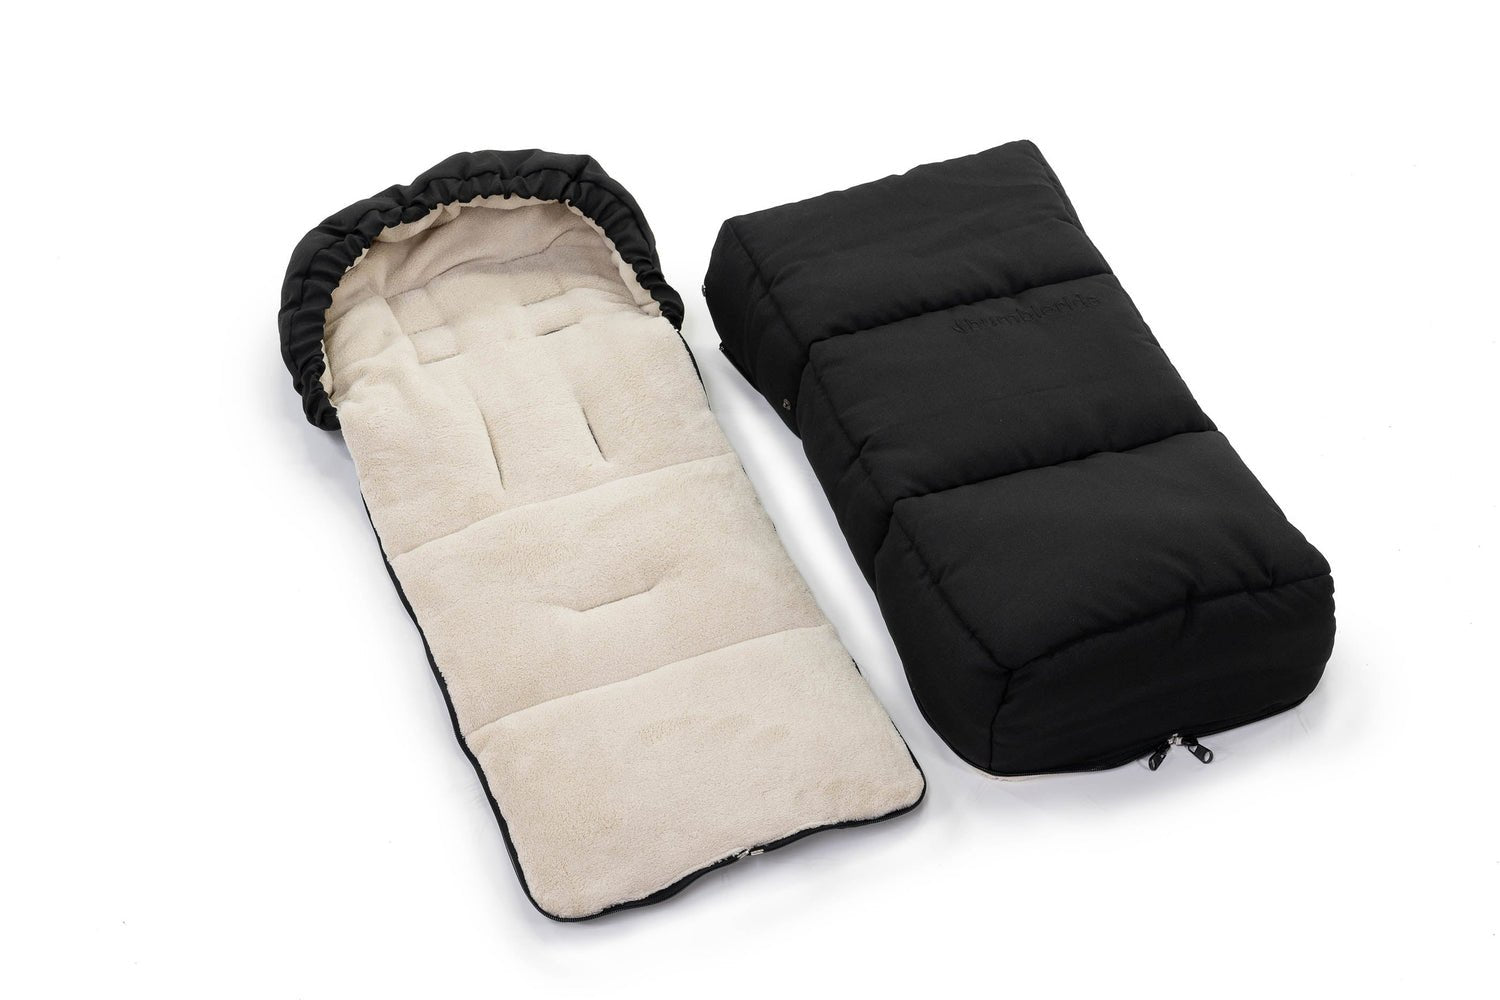 BUMBLERIDE Cold Weather Footmuff - ANB Baby -8500531310040$100 - $300